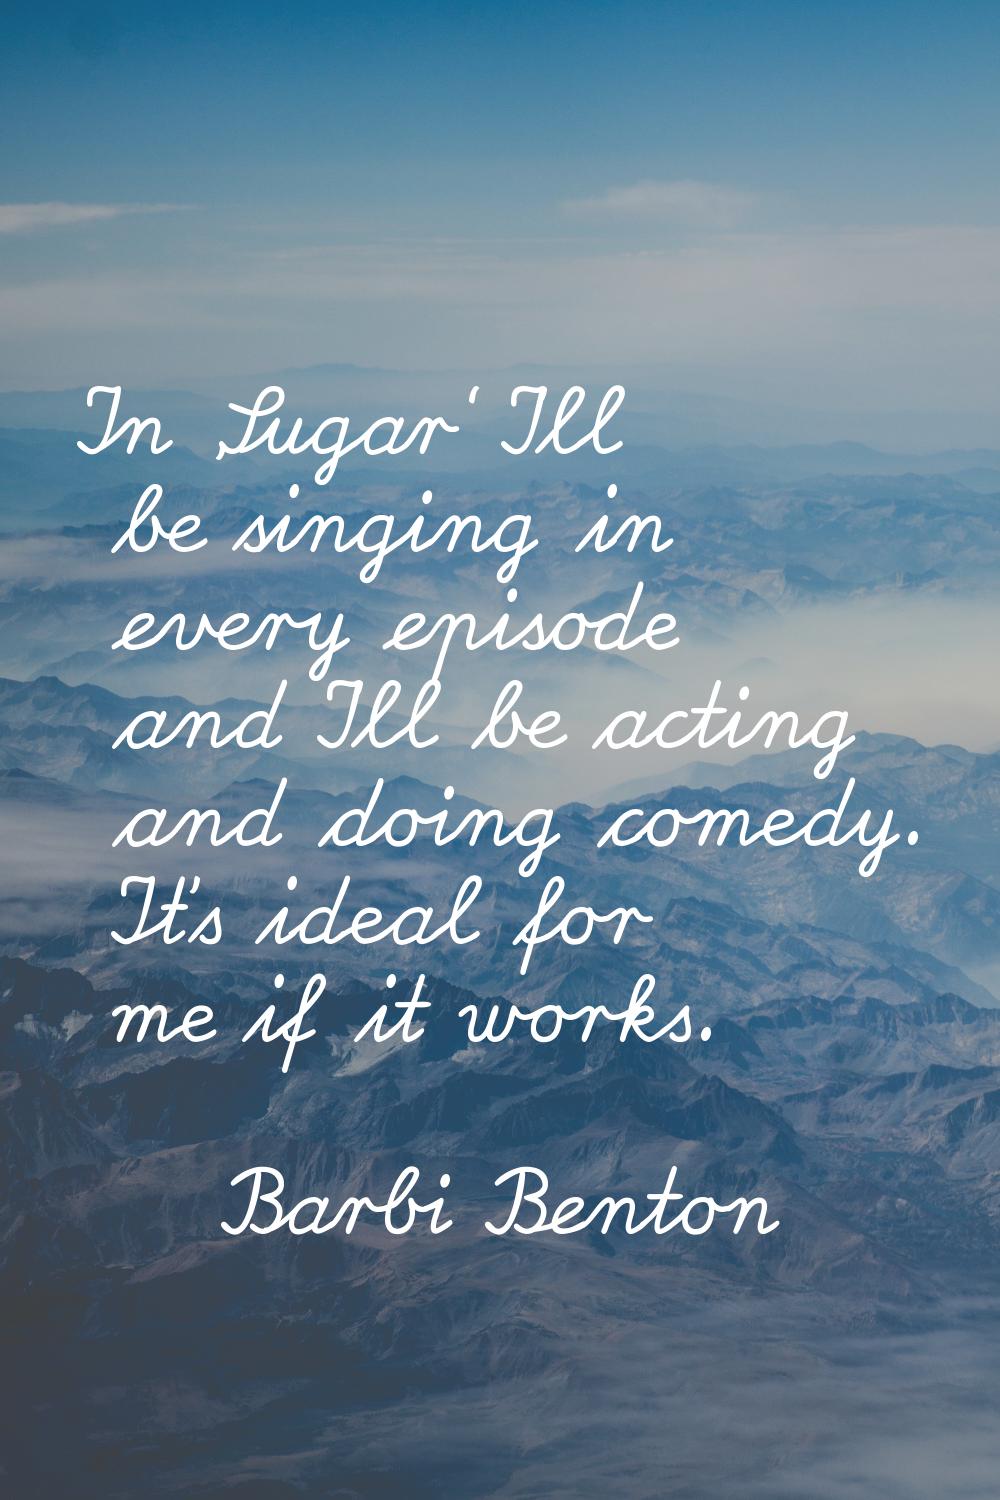 In 'Sugar' I'll be singing in every episode and I'll be acting and doing comedy. It's ideal for me 